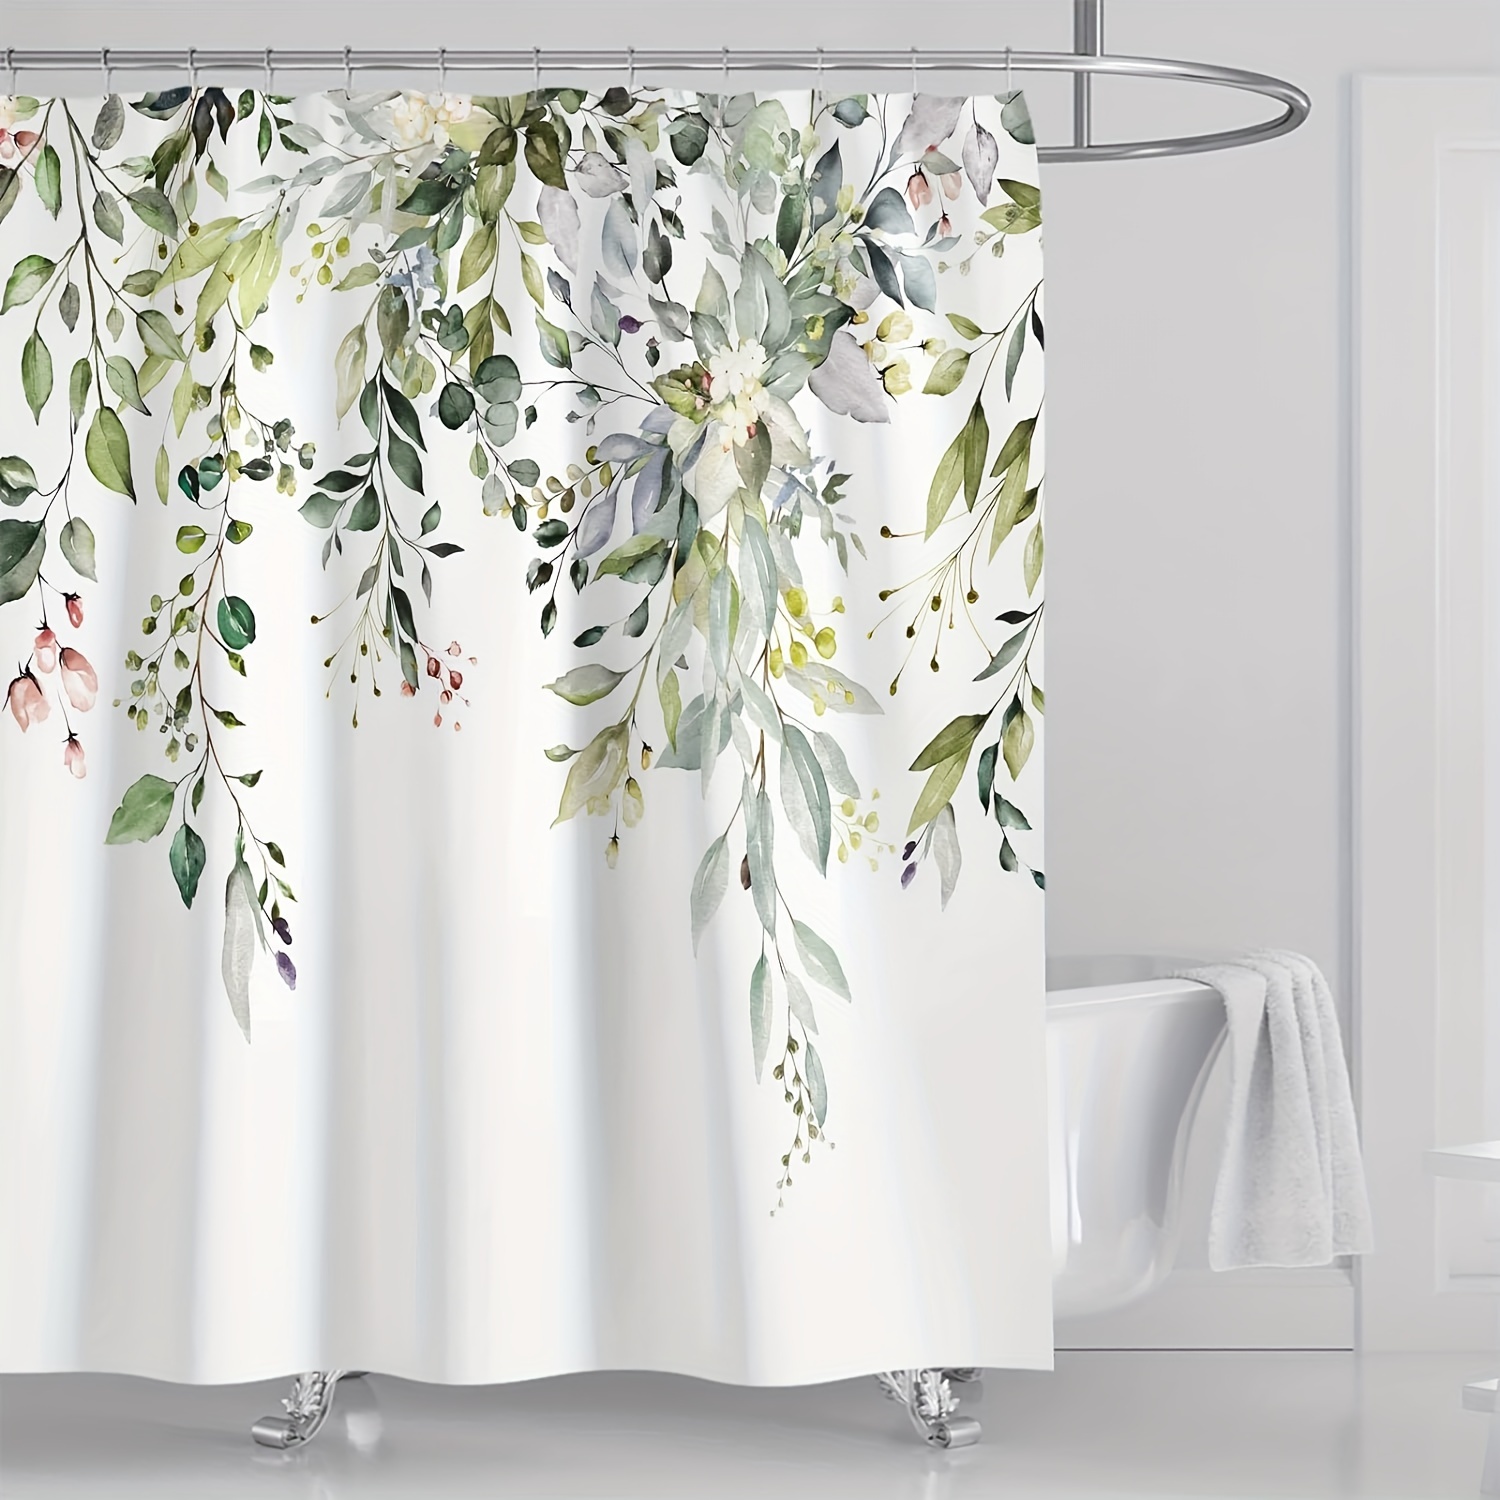 

1pc Shower Curtain, Waterproof Green Shower Curtain, 3d Printing Washable Extra Long Bathroom Shower Curtain, Flower Plant Green Leaf Shower Curtain With 12 Hook Shower Curtain